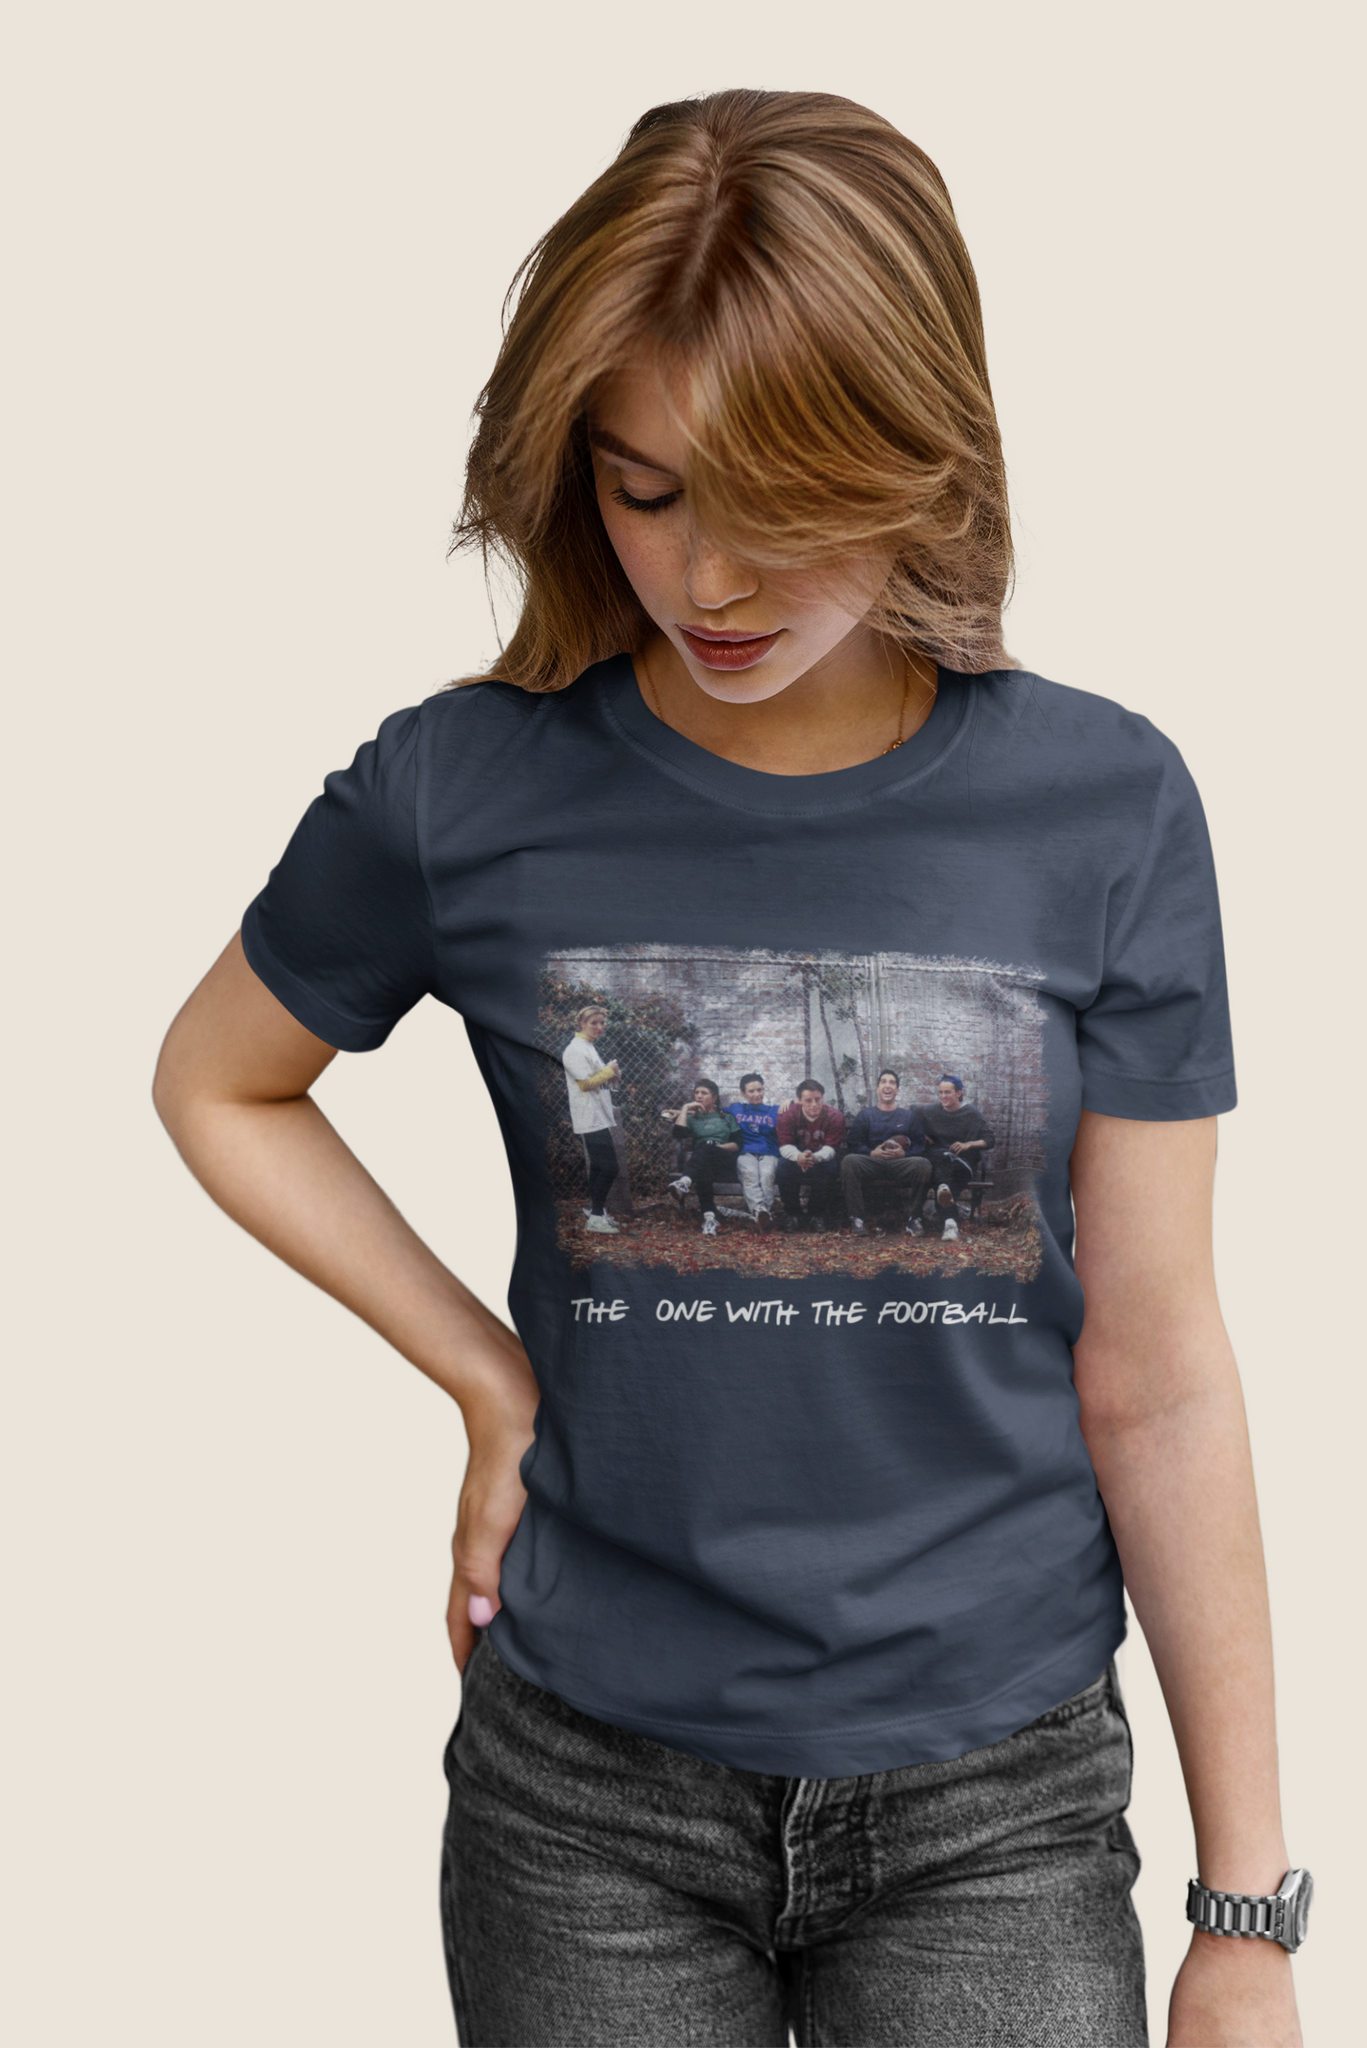 Friends TV Show T Shirt, Friends Characters T Shirt, The One With The Football Tshirt